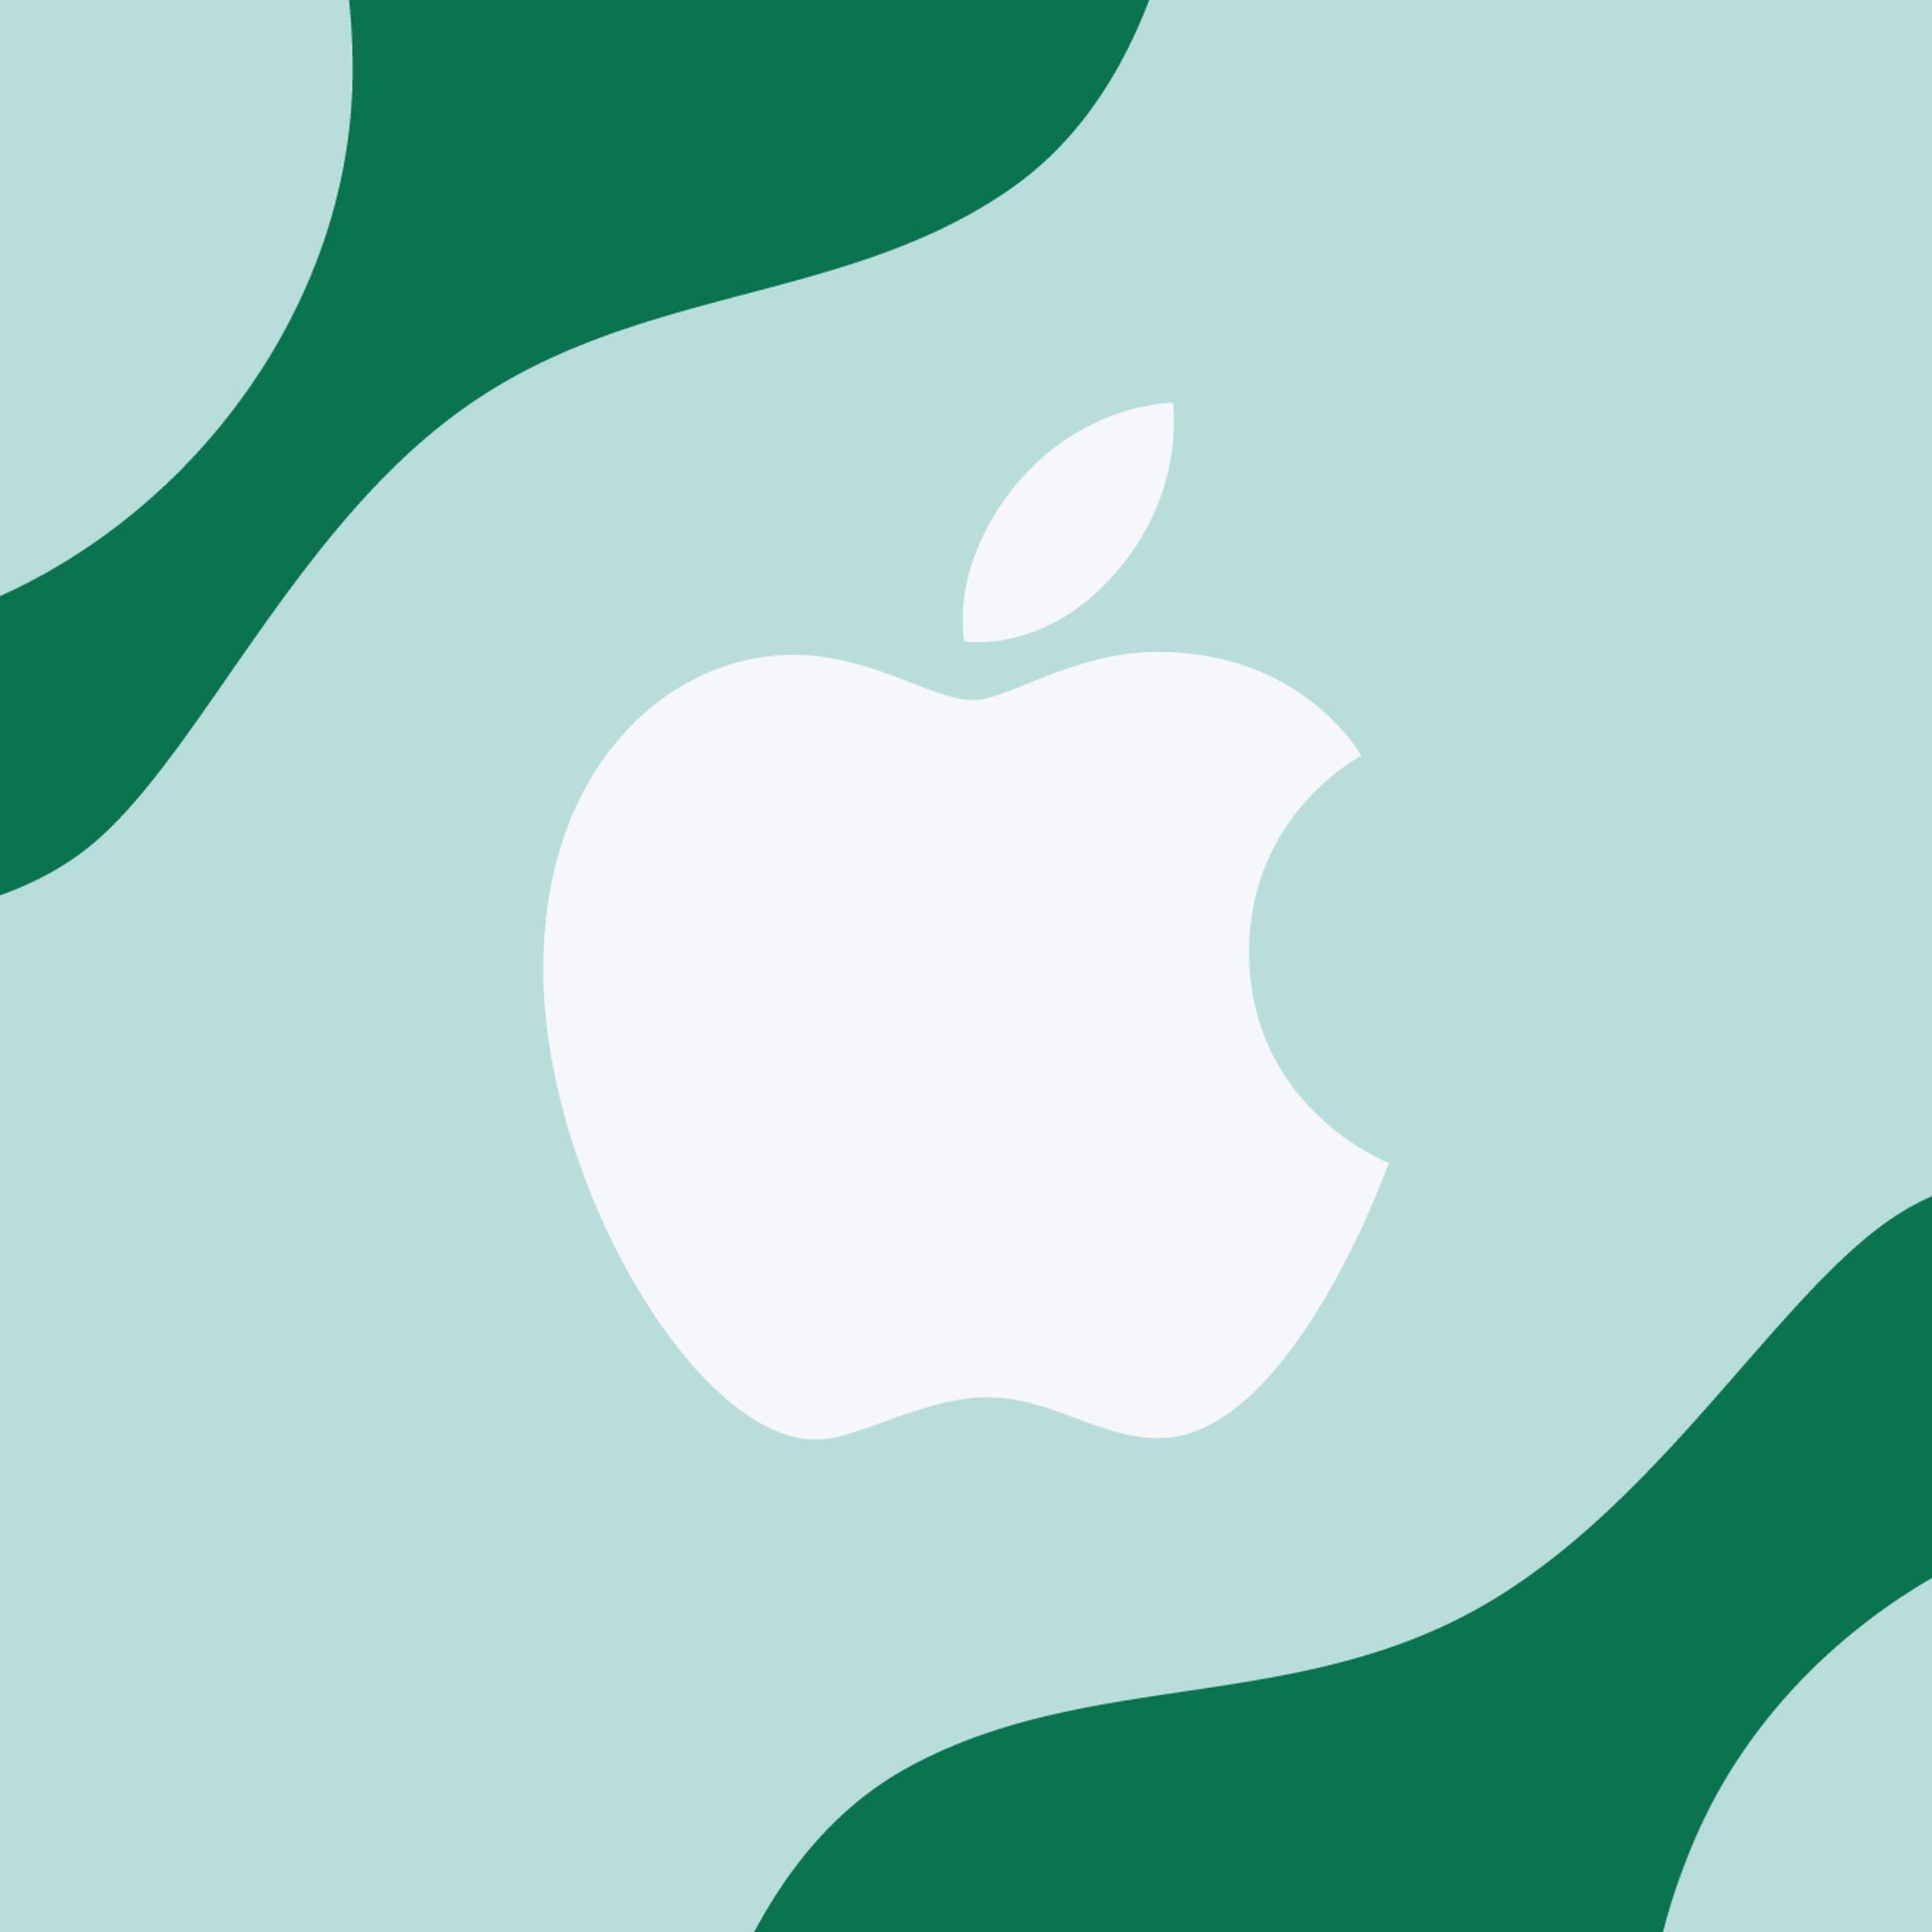 Illustration of the Apple logo on a light and dark green background.